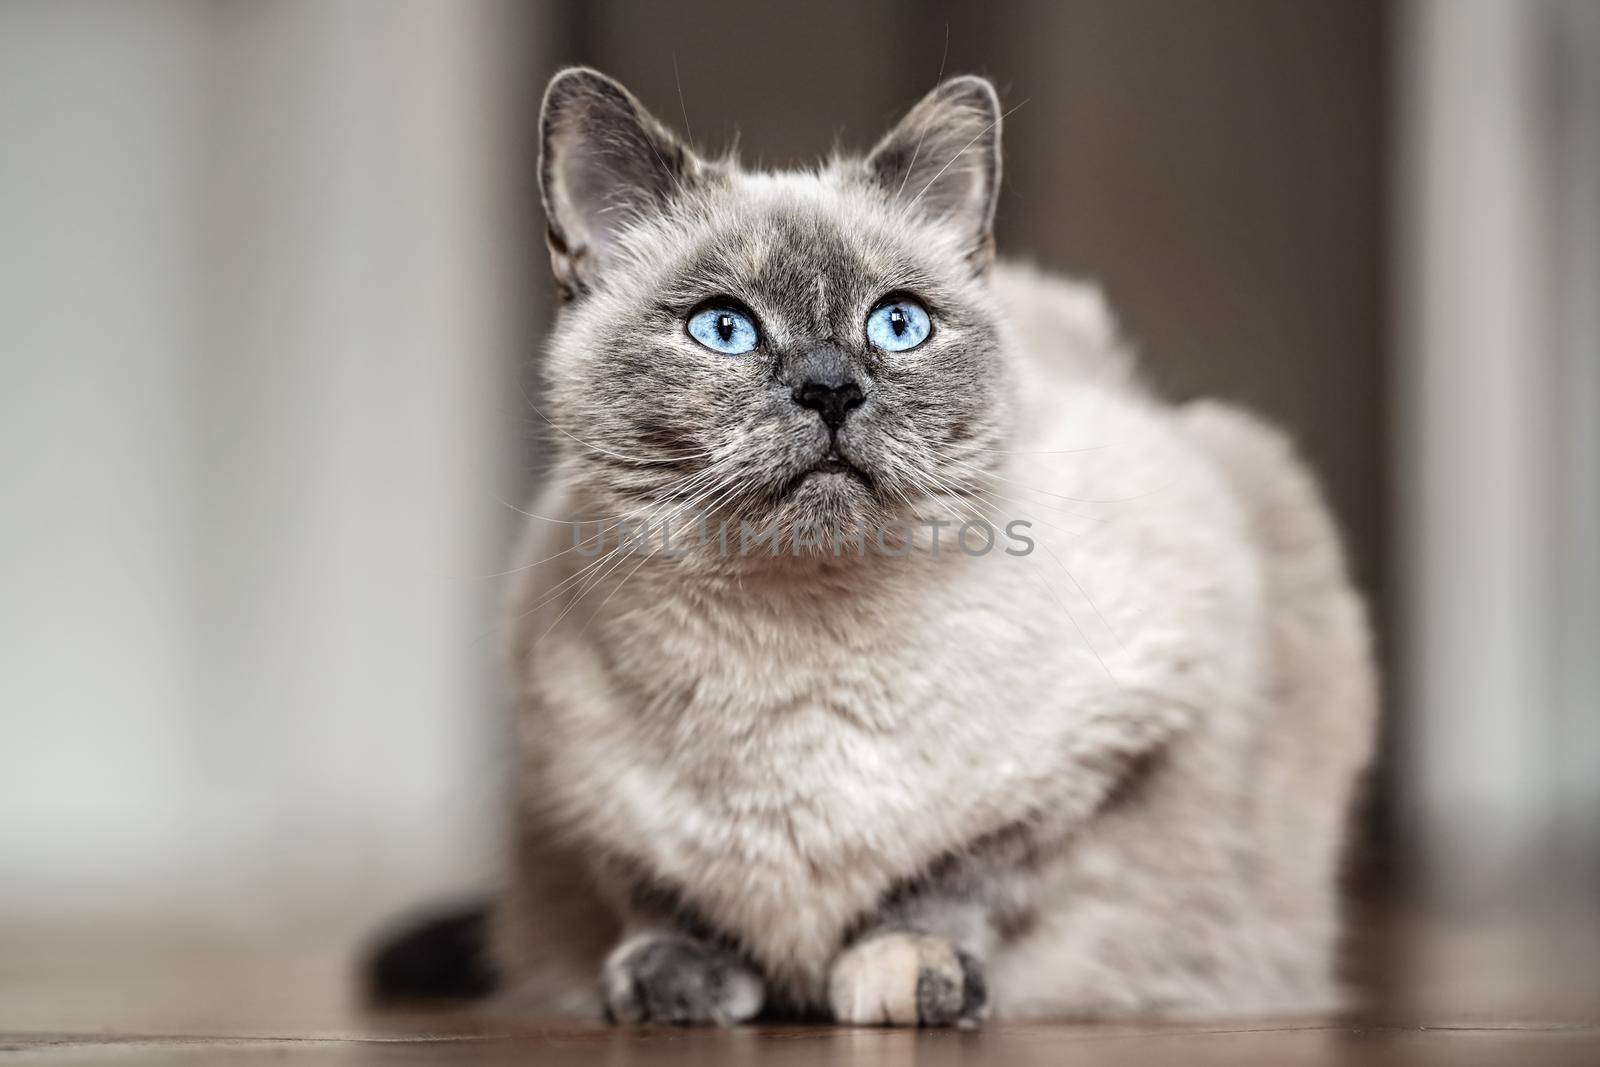 Older gray cat with piercing blue eyes, laying on wooden floor, closeup shallow depth of field photo by Ivanko